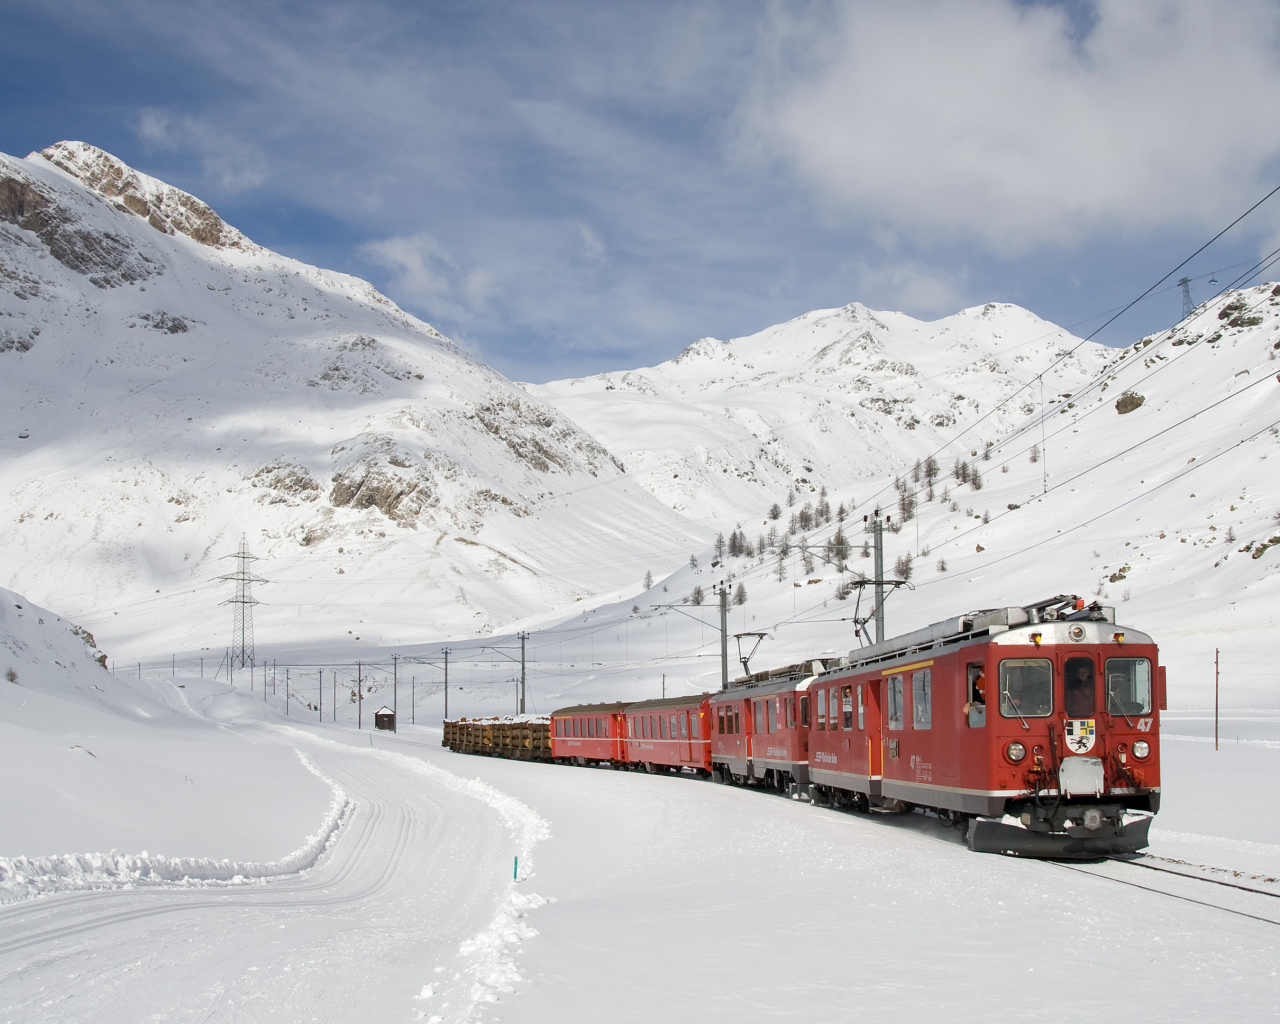 Train in snowy mountains